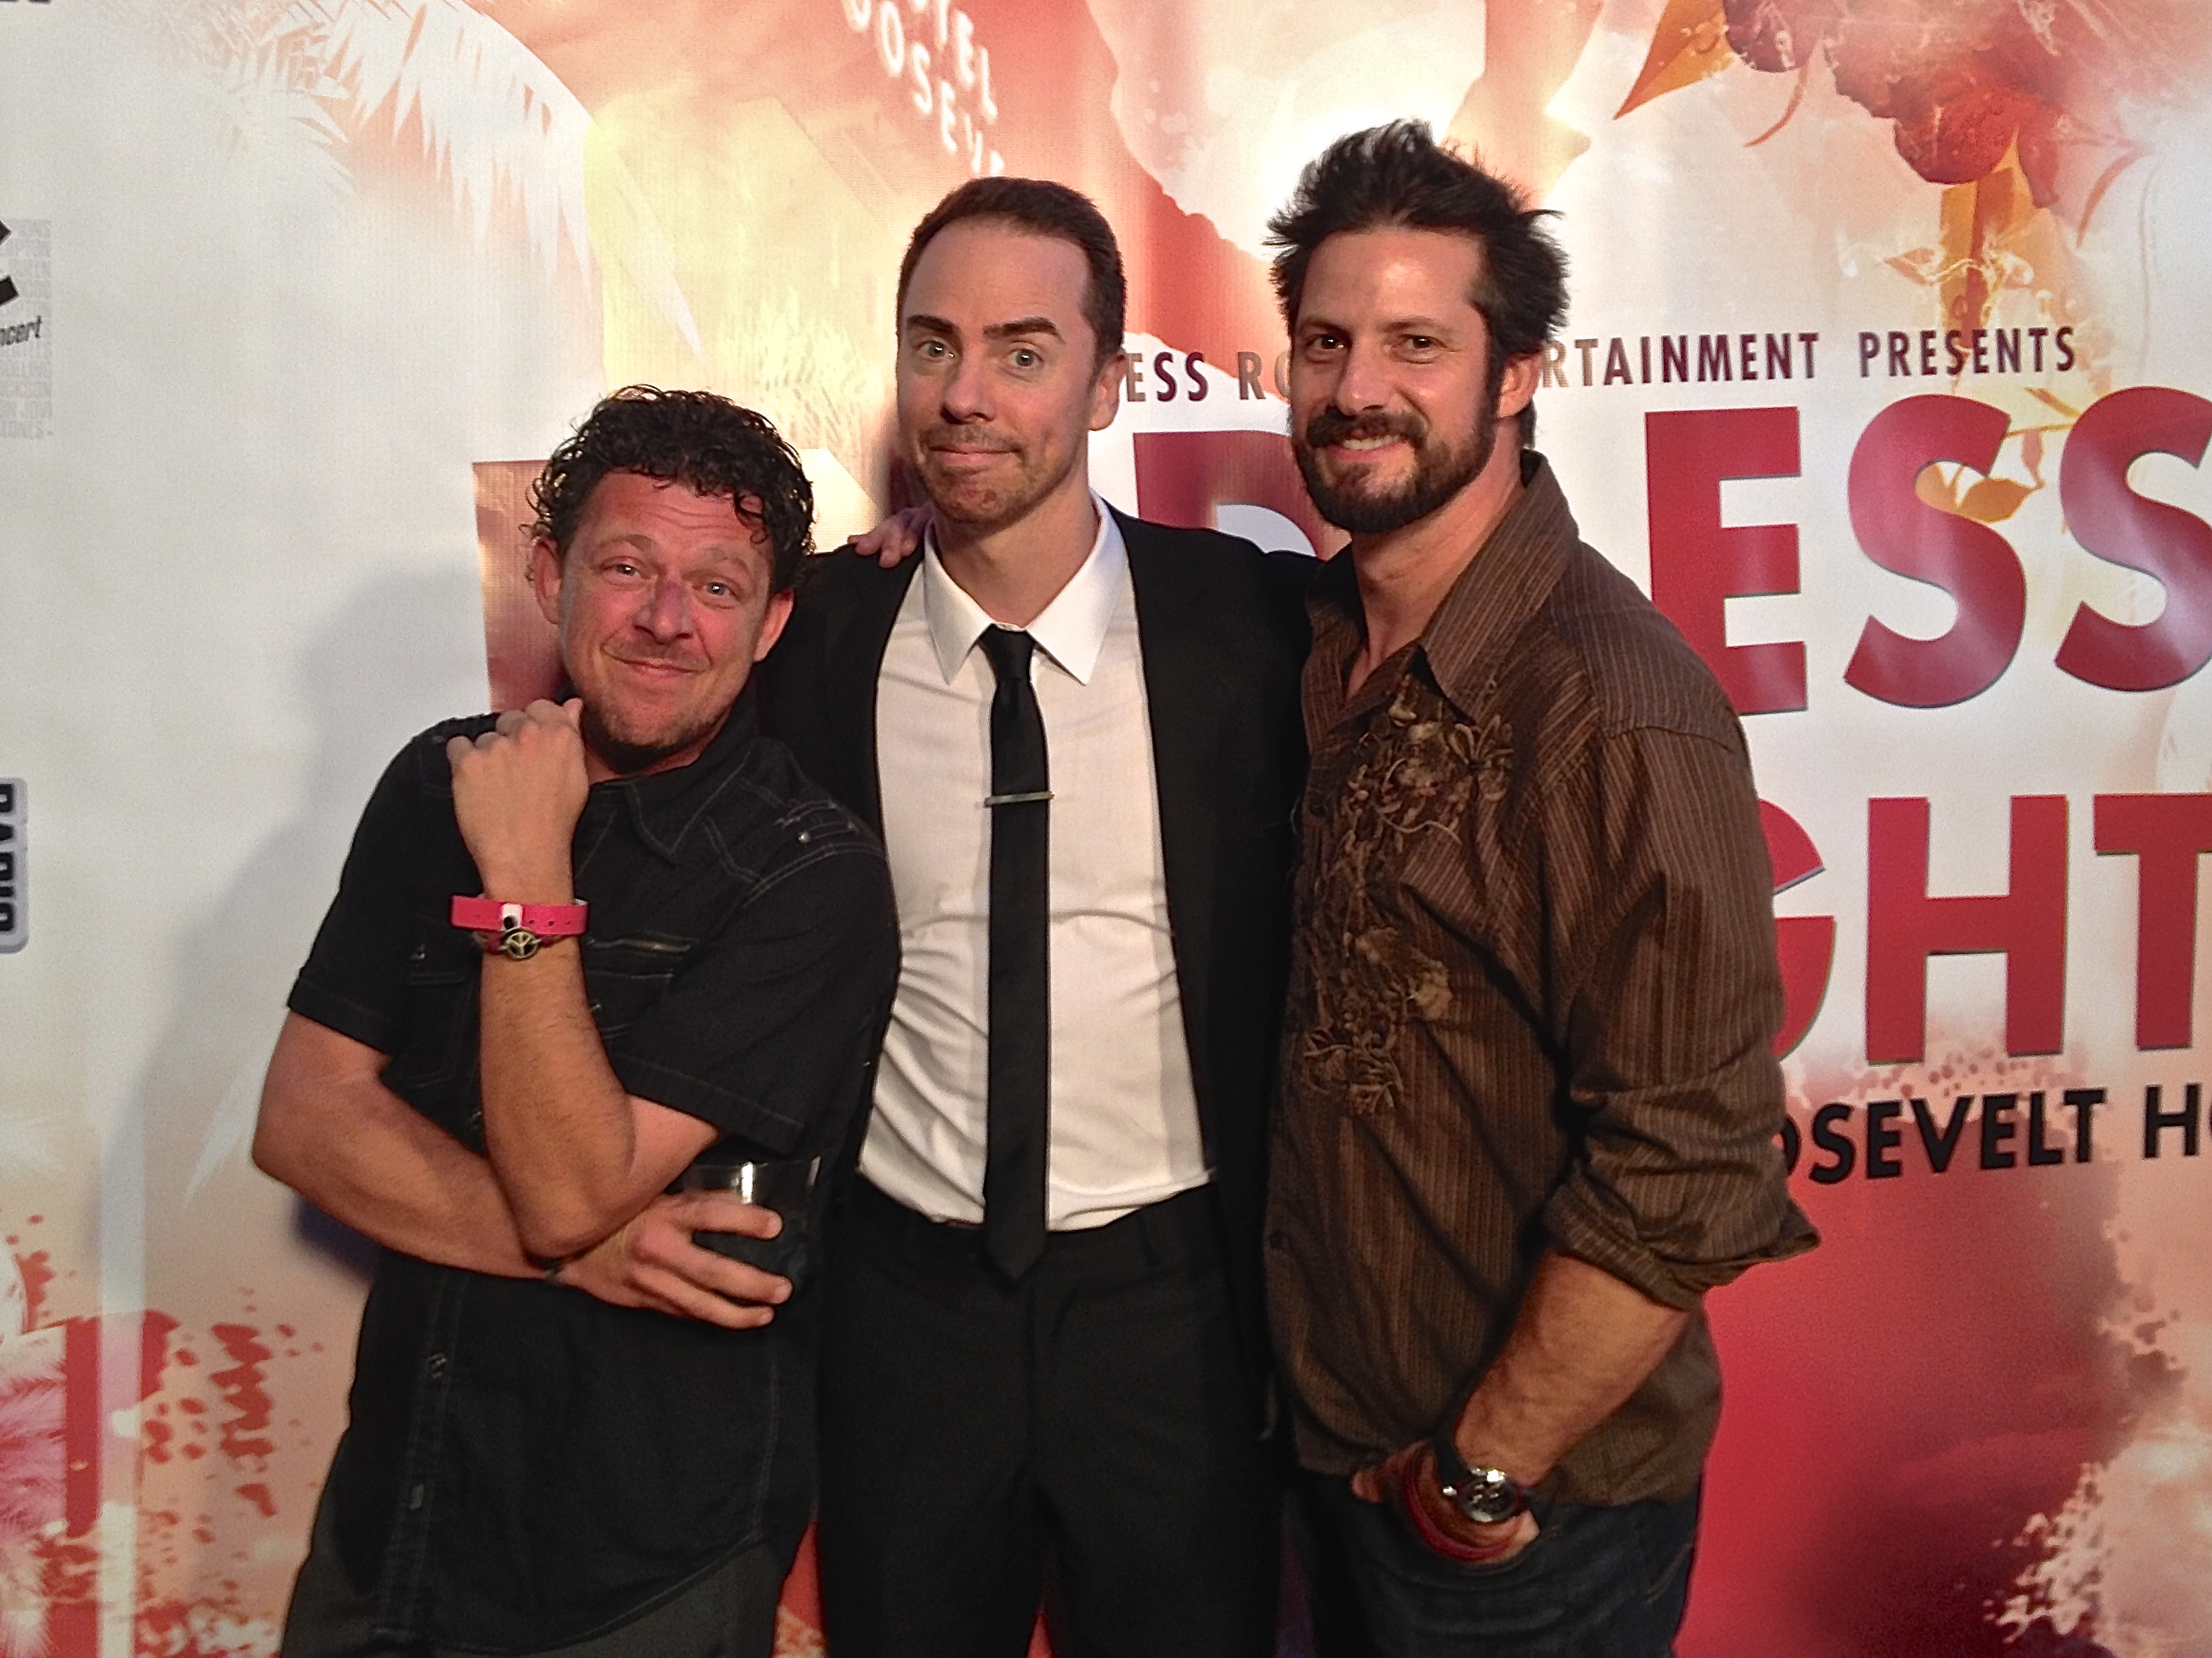 David Polcino (Producer-Lovesick Fool) with David Banks (Actor-CUT!) and David Rountree (Director-CUT!) at the Hollywood Elevator Magazine Dress the Night Event in Los Angeles